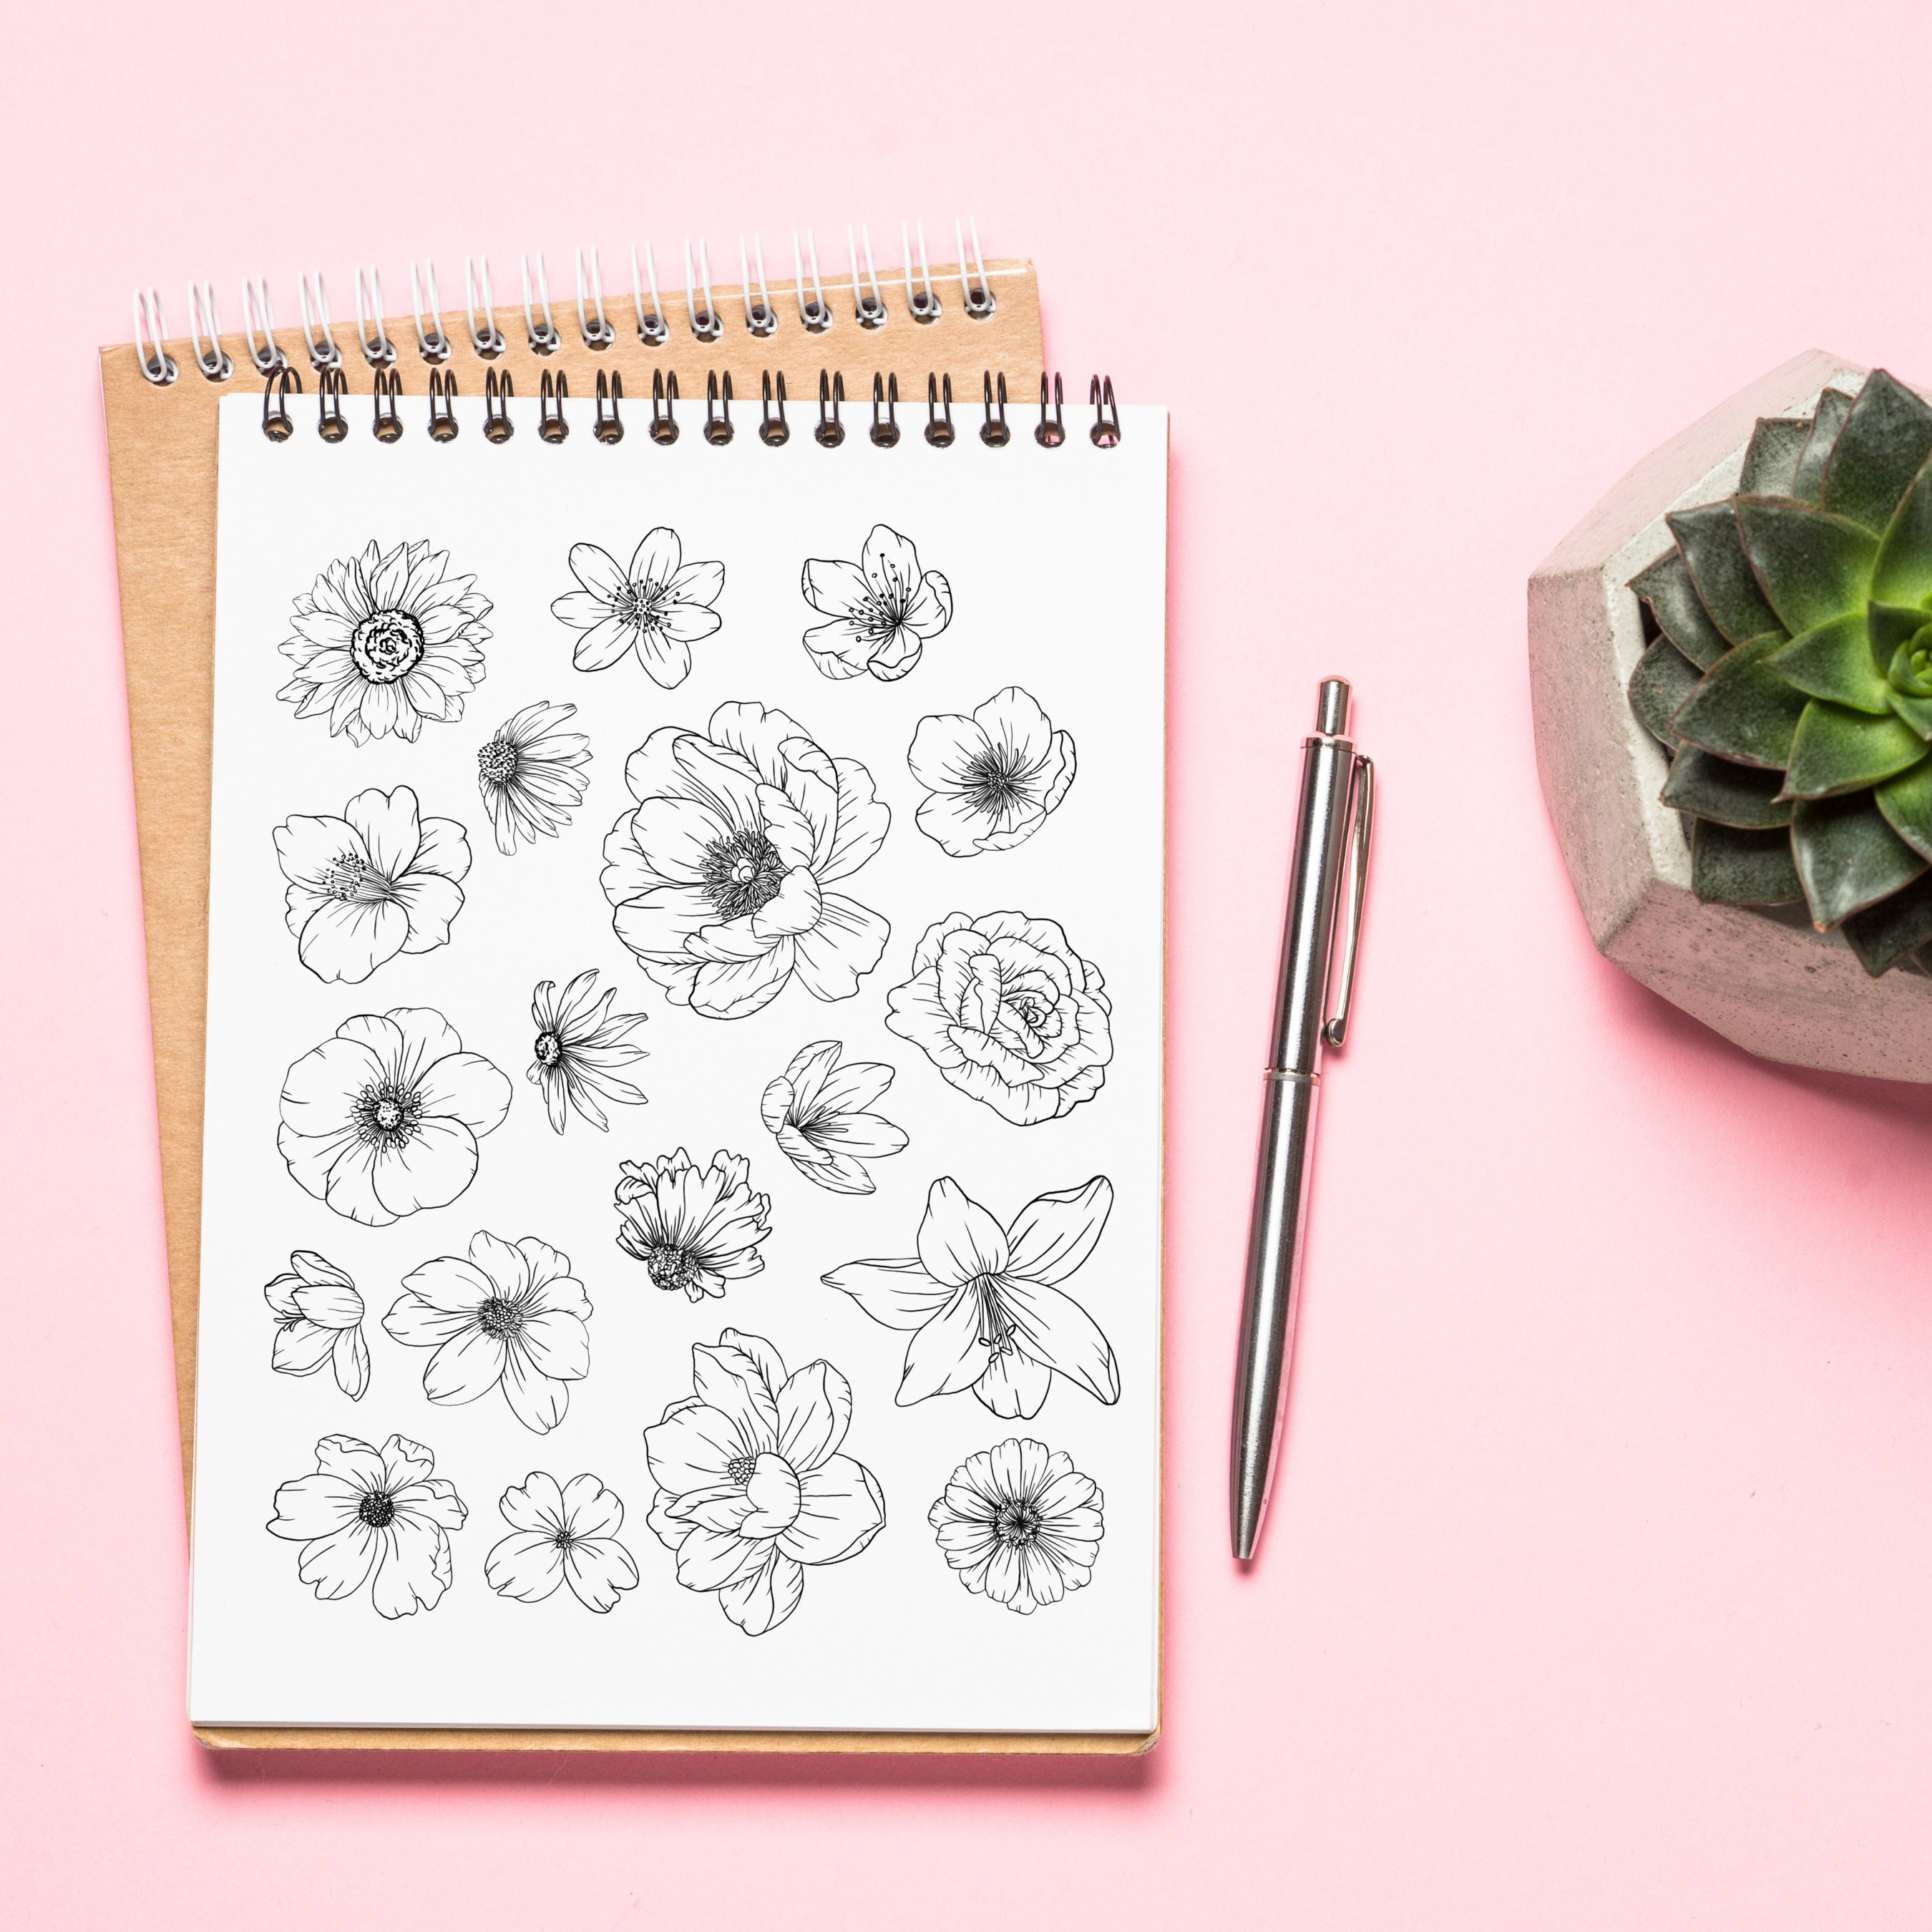 How To Draw FLOWERS Adult Tracing Book: Stress Relieving Flower Designs  (Trace Along) book by Blossom Notebooks: 9781652301233